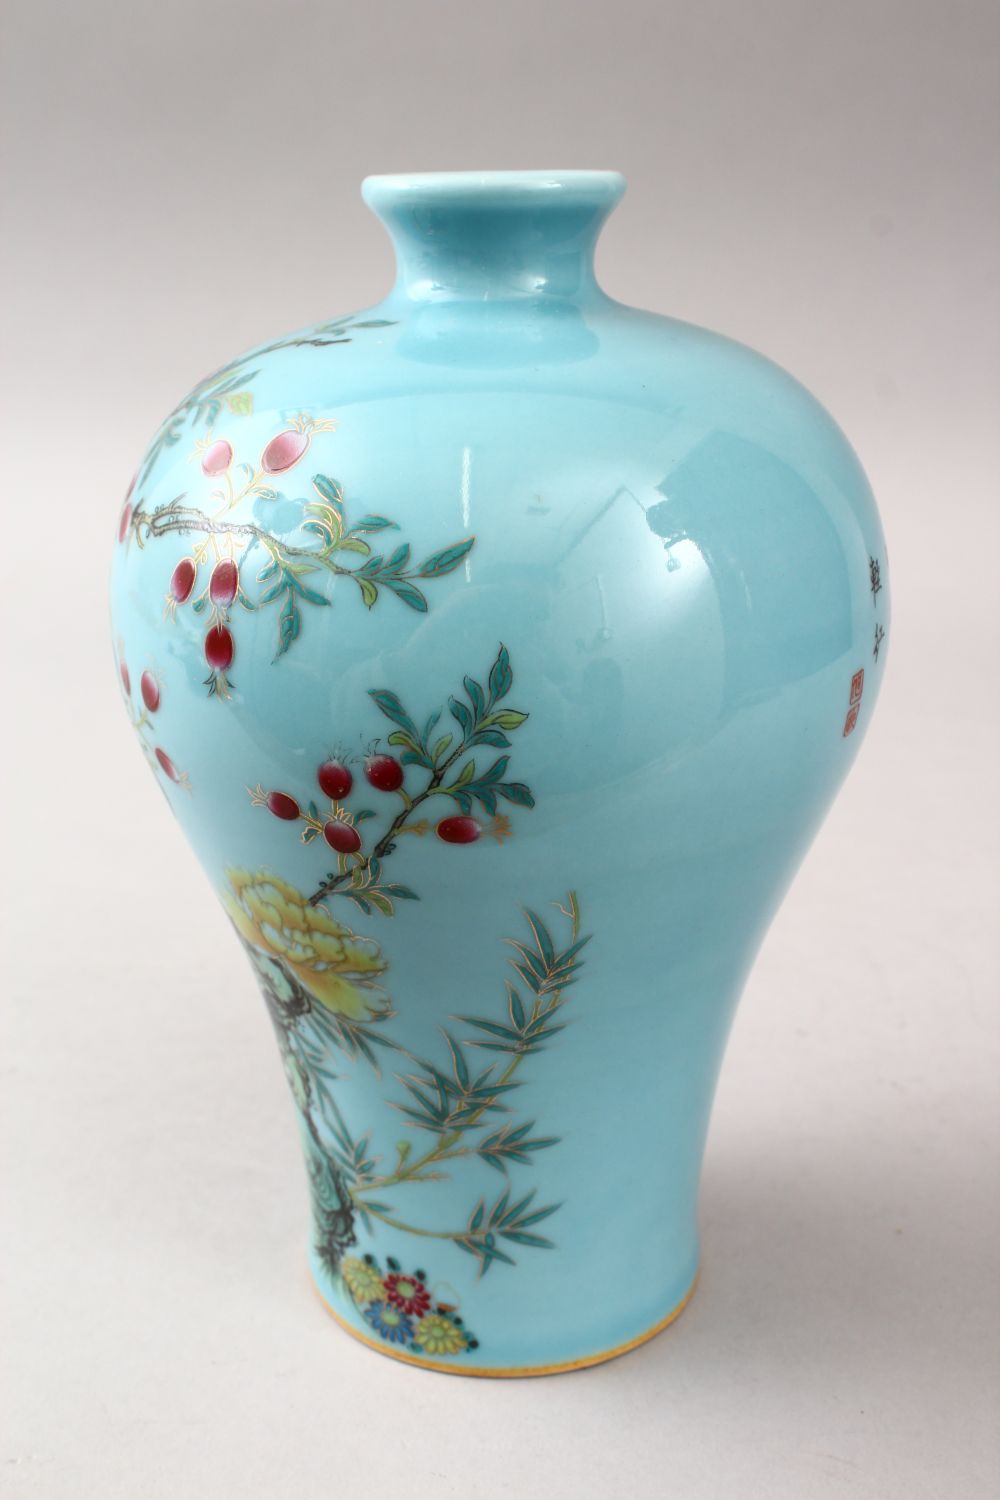 A GOOD CHINESE FAMILLE ROSE PORCELAIN MEIPING VASE, the body with a turquoise ground and decorated - Image 4 of 8